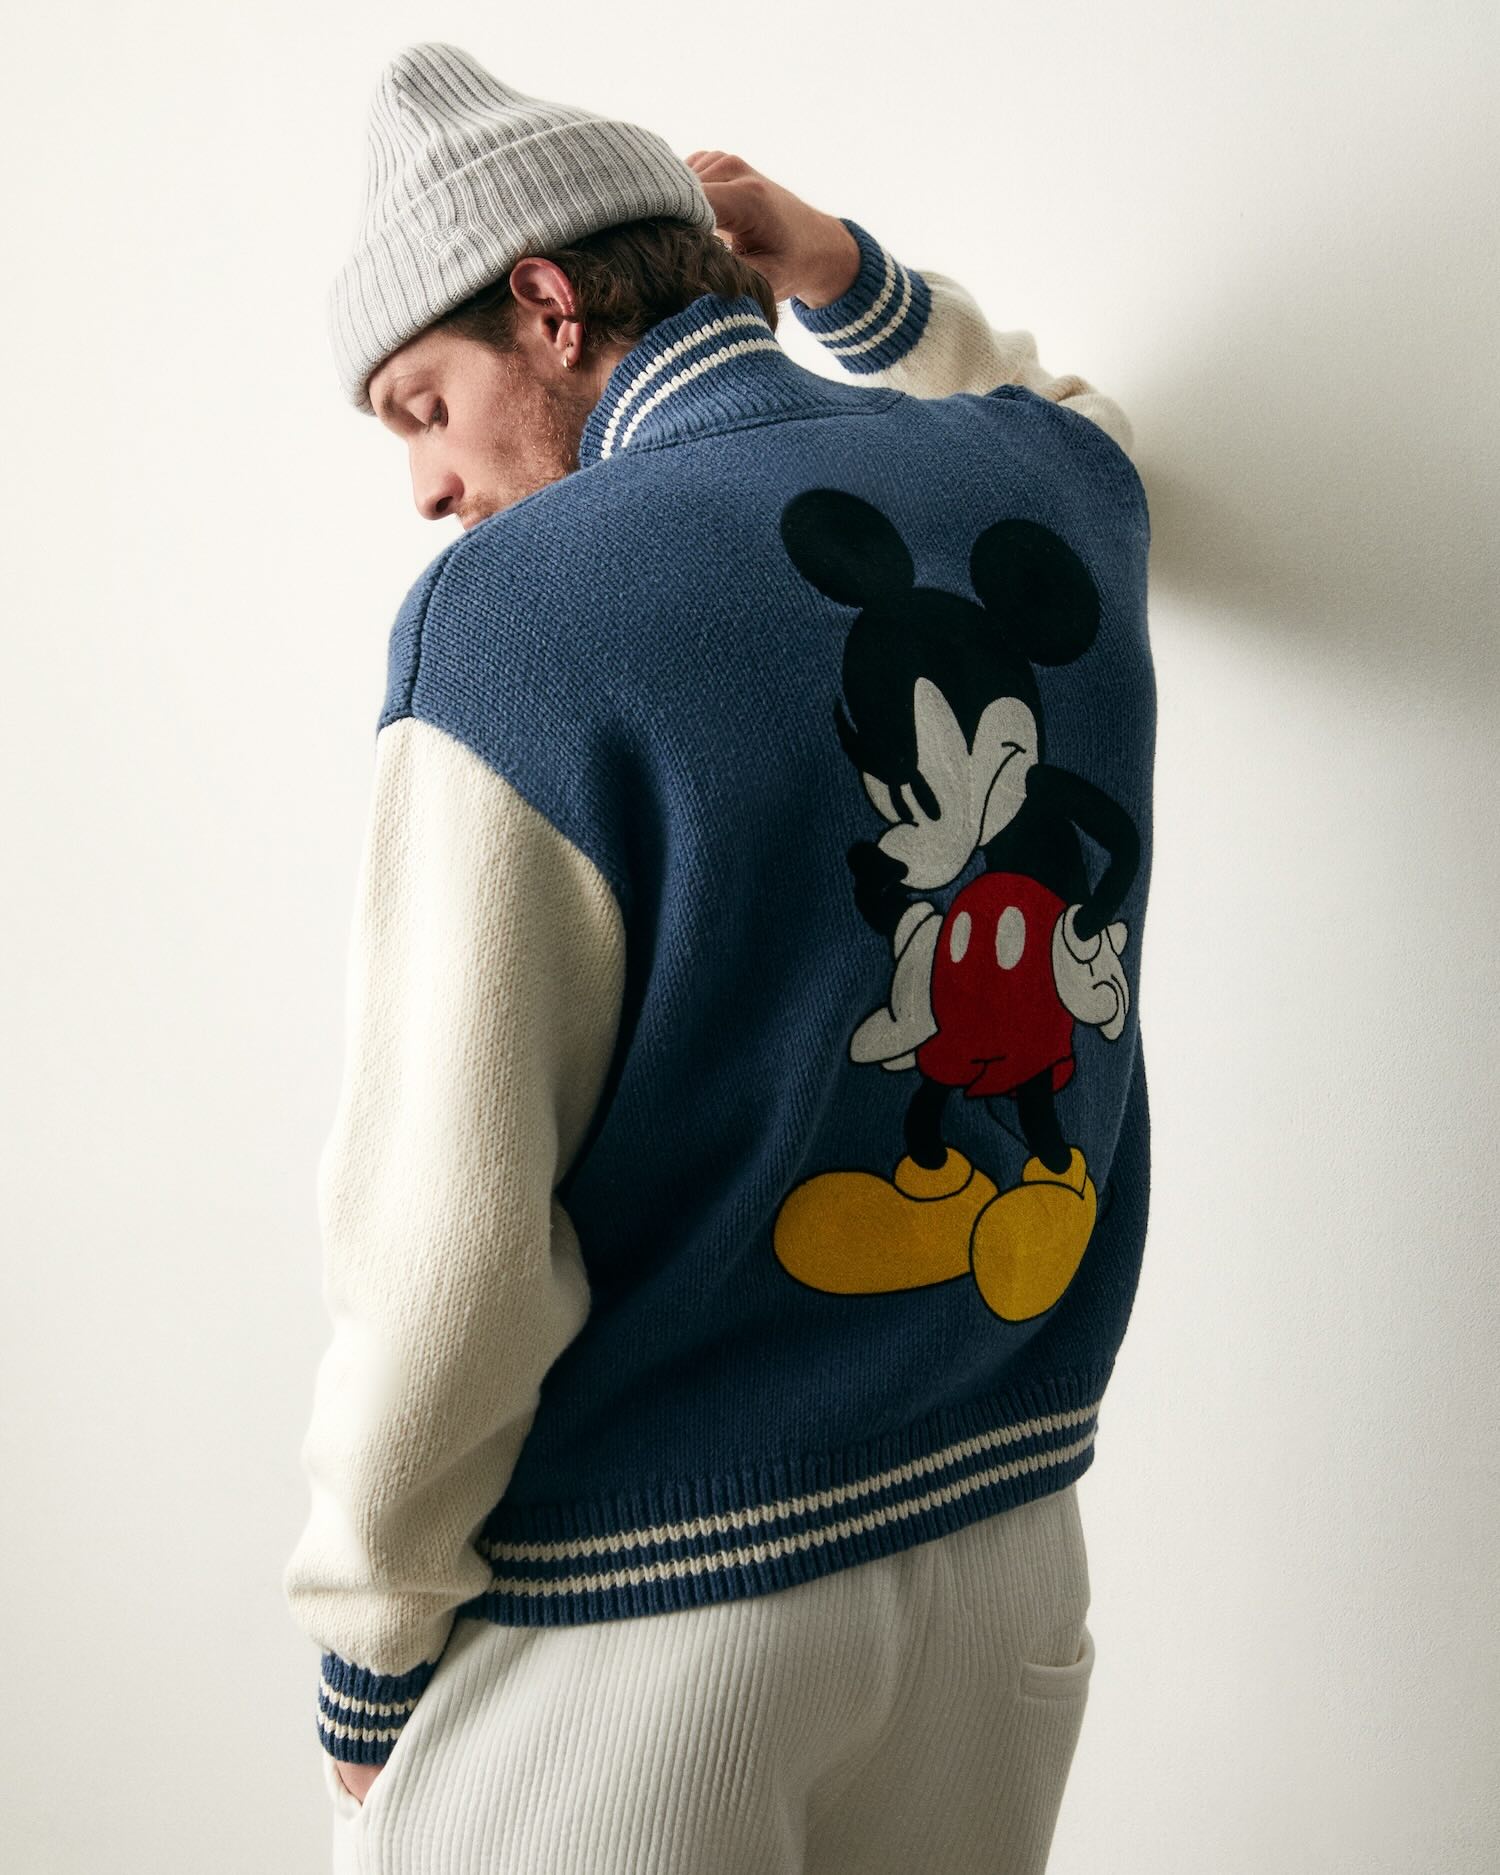  Kith x Disney "Mickey & Friends" Collection Release Date